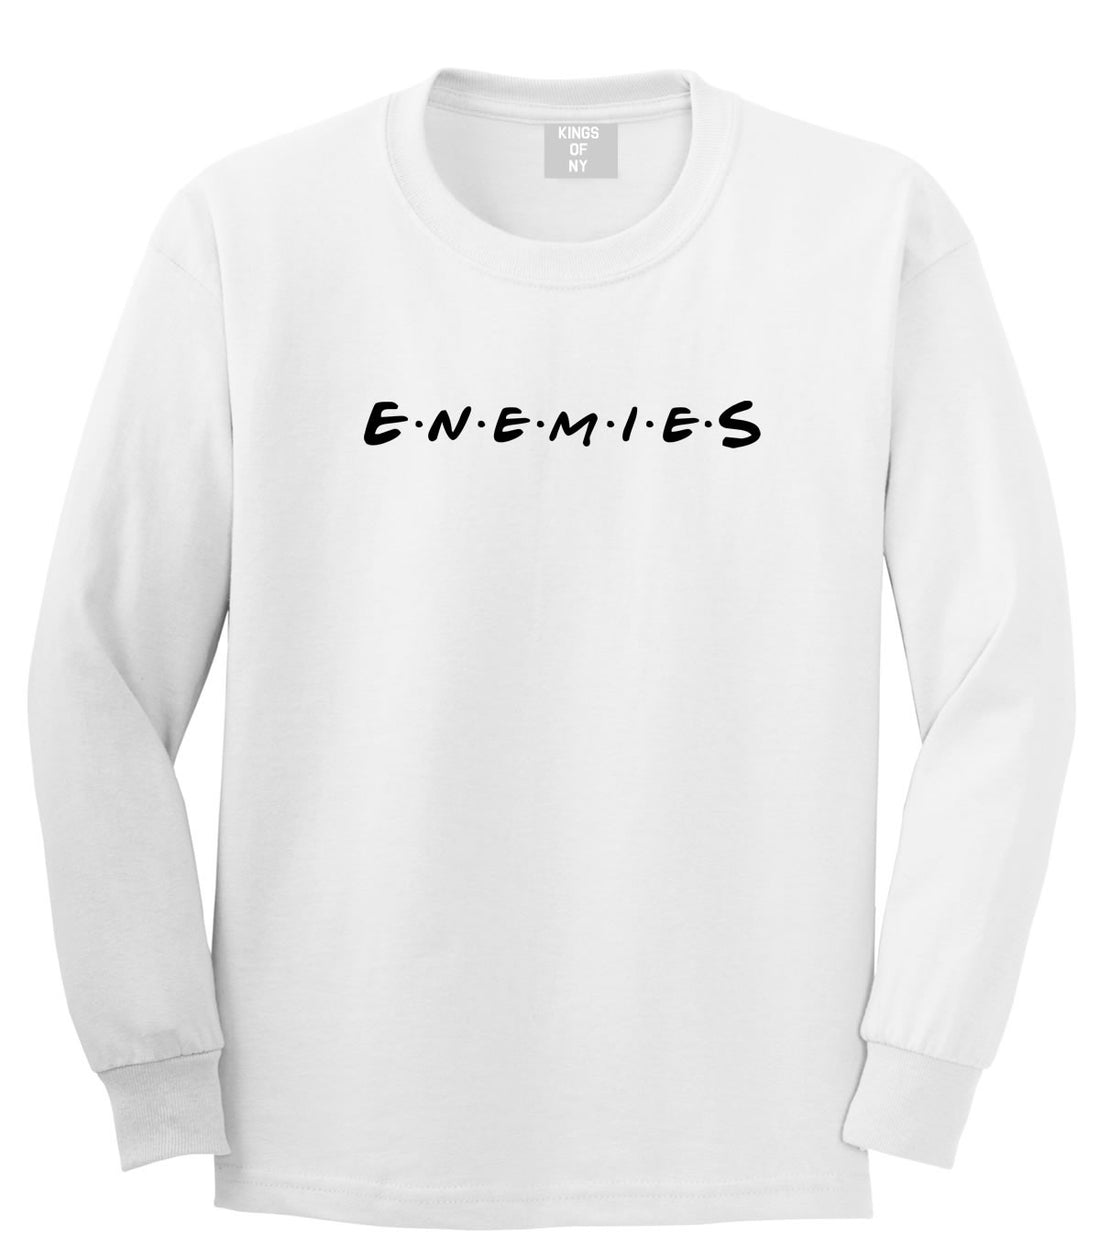 Enemies Friends Parody Long Sleeve T-Shirt in White By Kings Of NY